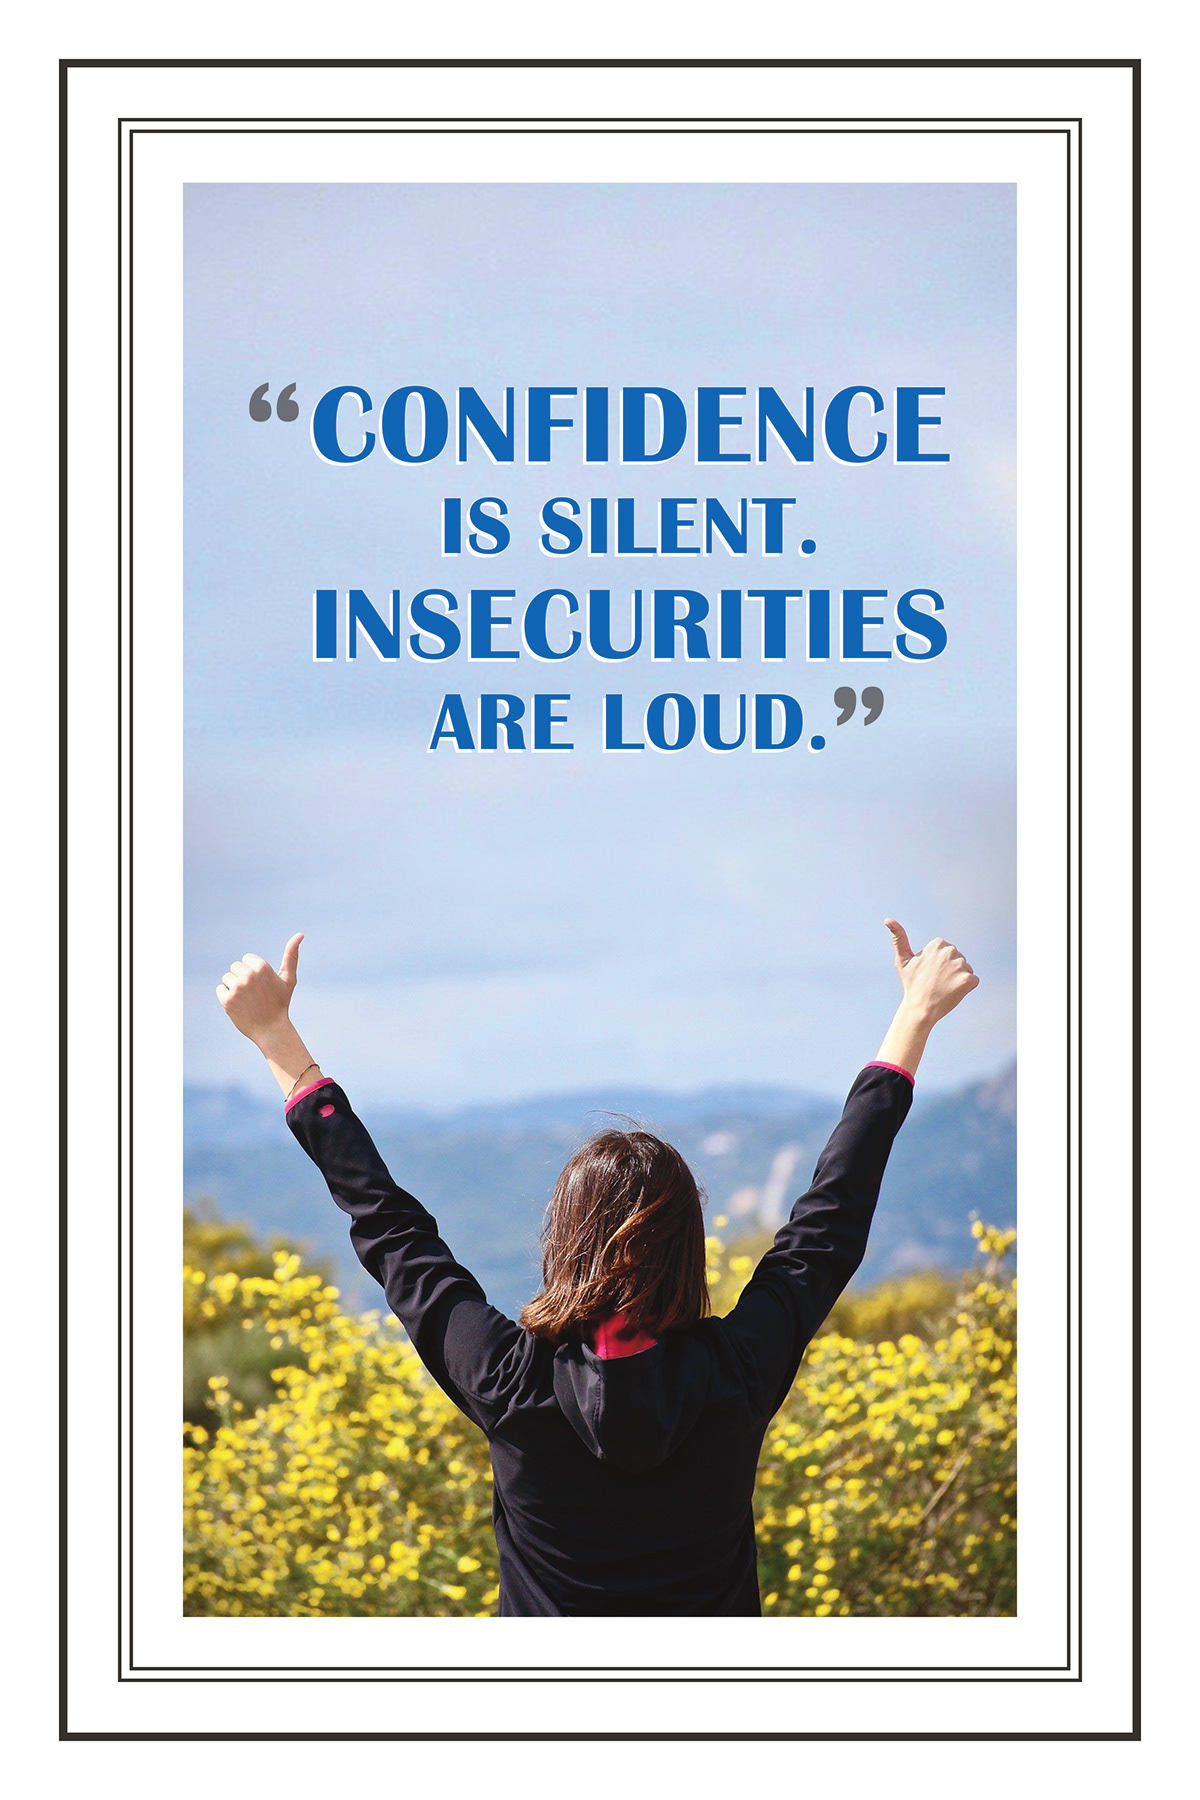 Confidence is Silent, Insecurities are Loud!